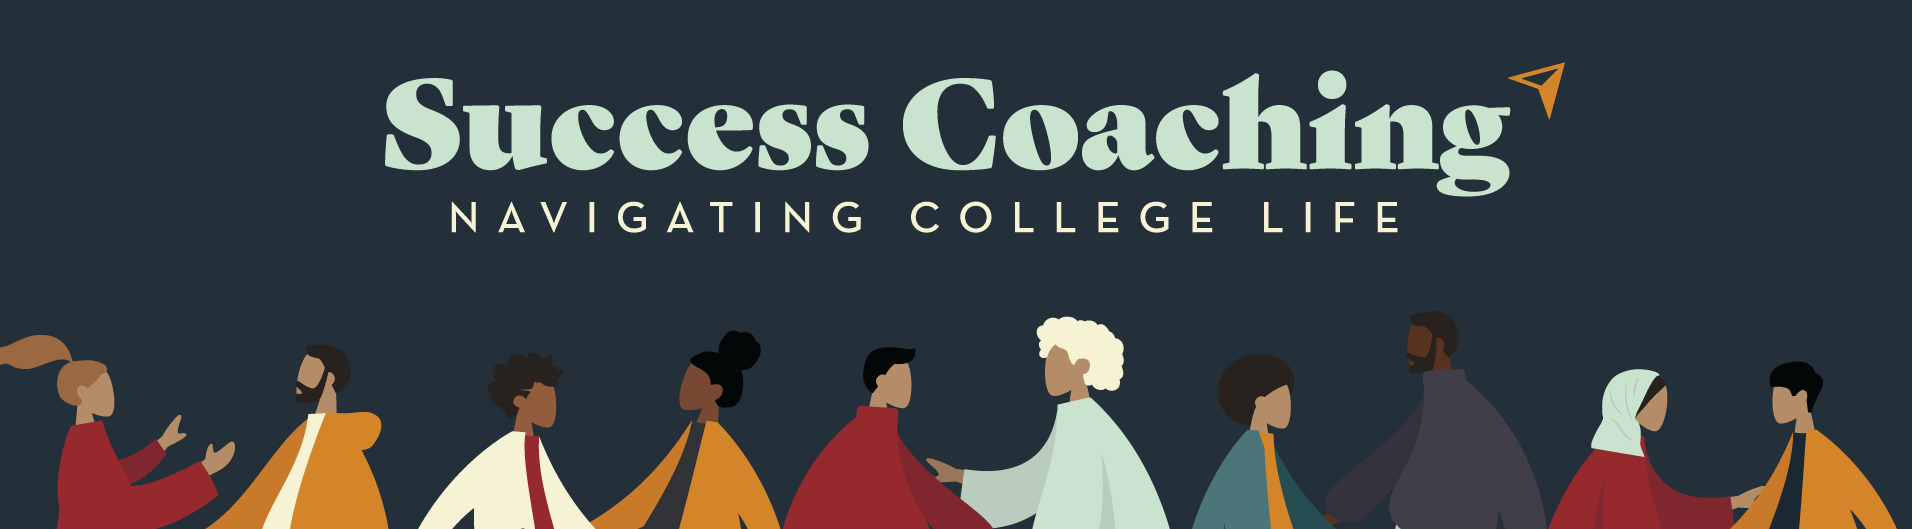 groups of people talking to each other with the text "Success Coaching: Navigating College Life"